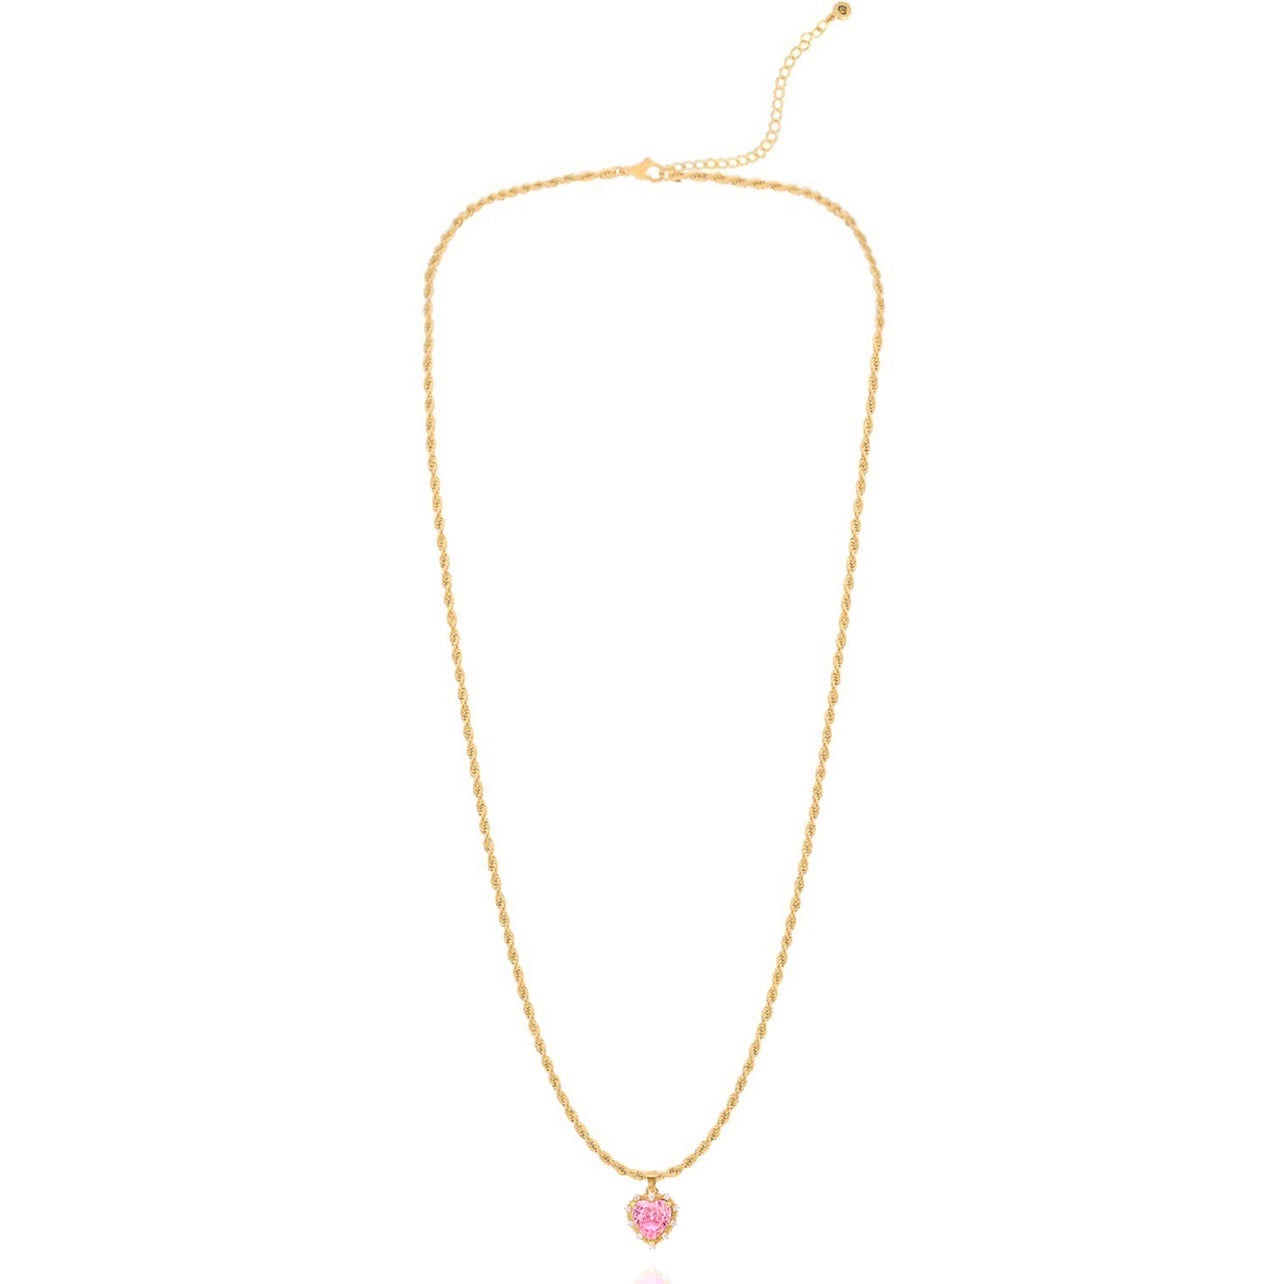 Kind Hearted Necklace in Pink